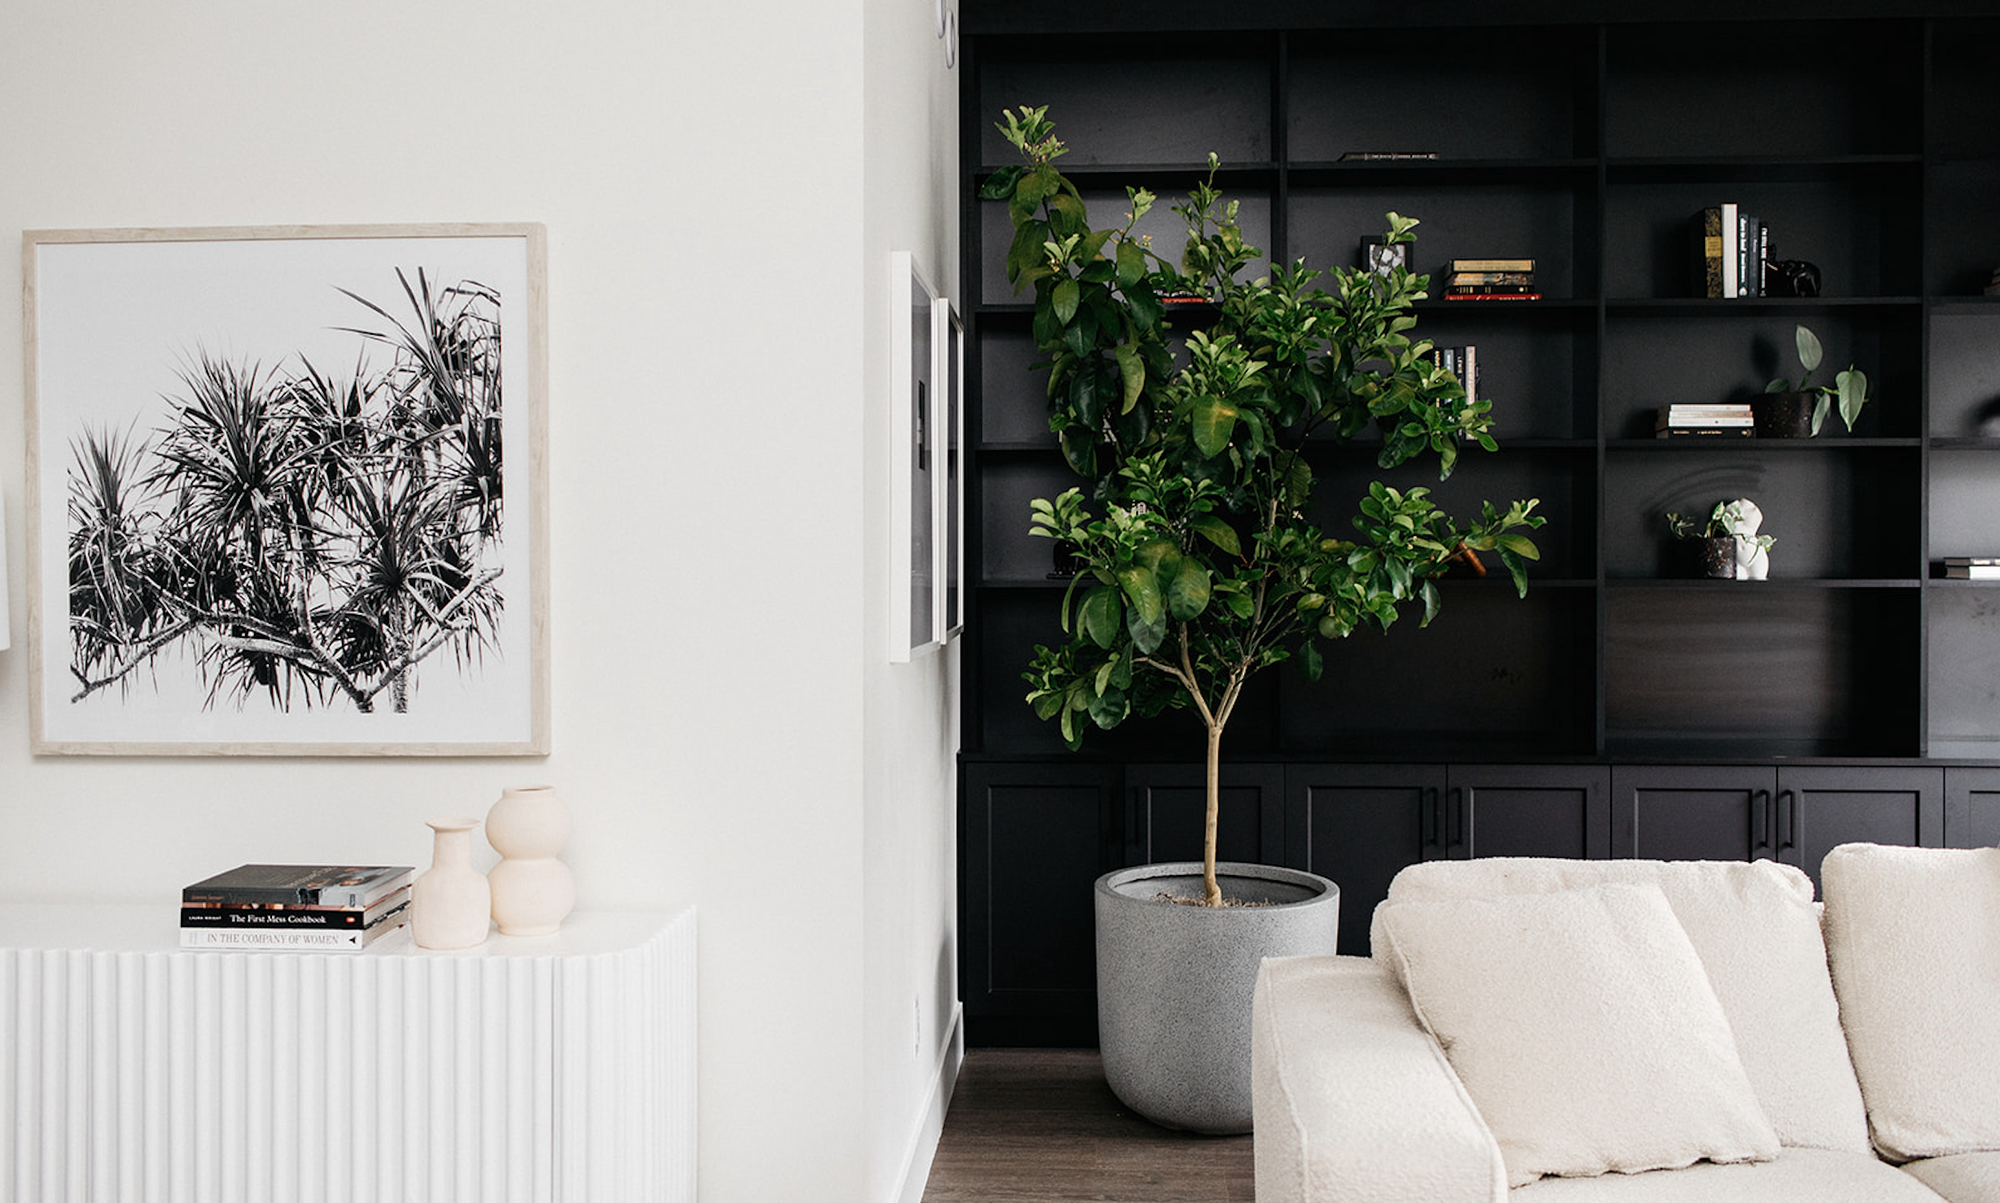 Living room with white boucle sofa, credenza and bookshelves. A large grapefruit tree is front and centre in a grey planter.